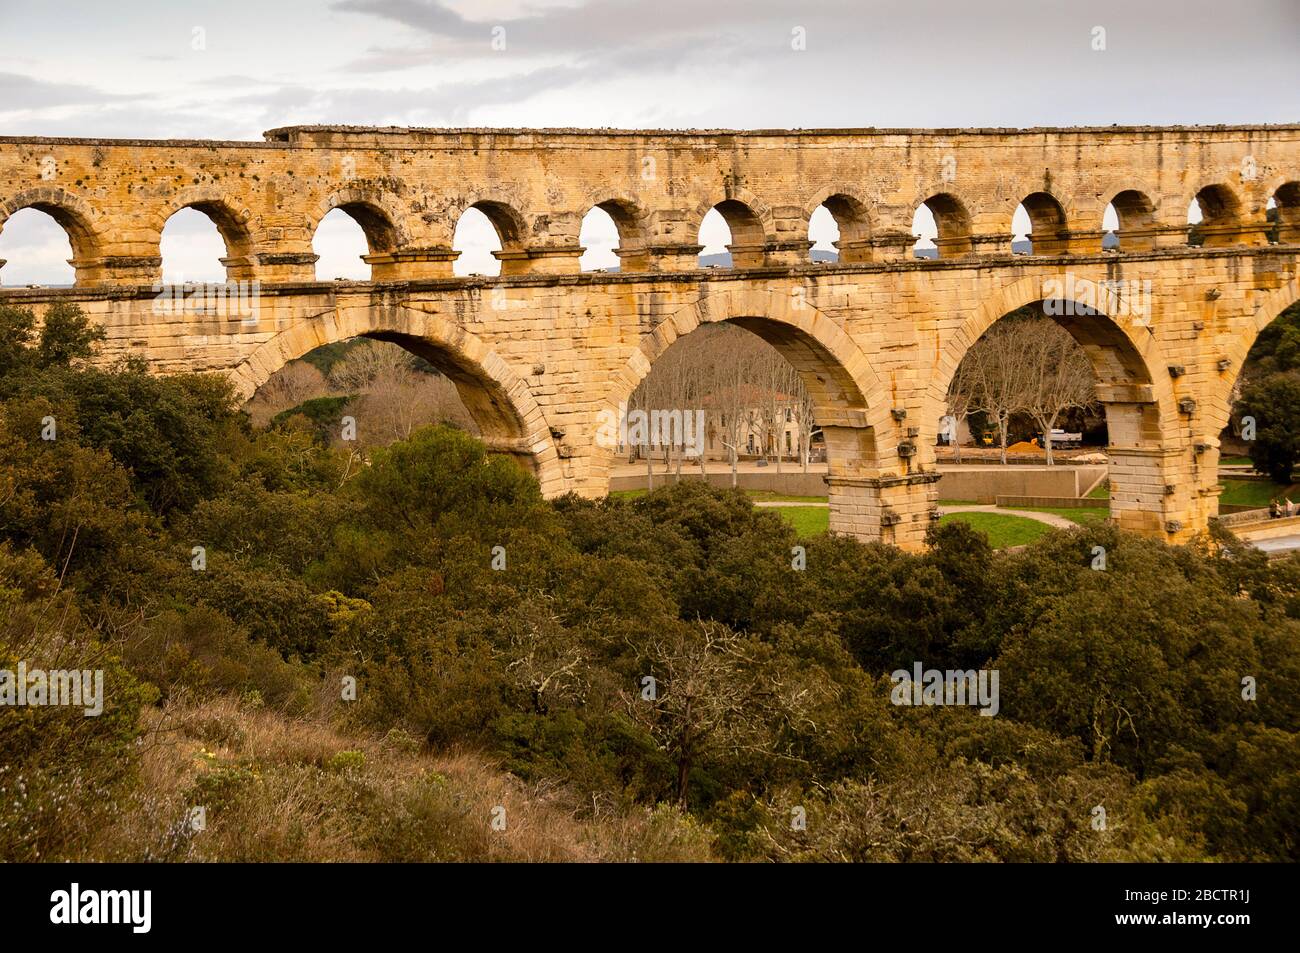 Pont du Gard ancient Roman aqueduct built in the first century AD to carry water to Nîmes, France is now an impressive World Heritage Site. Stock Photo